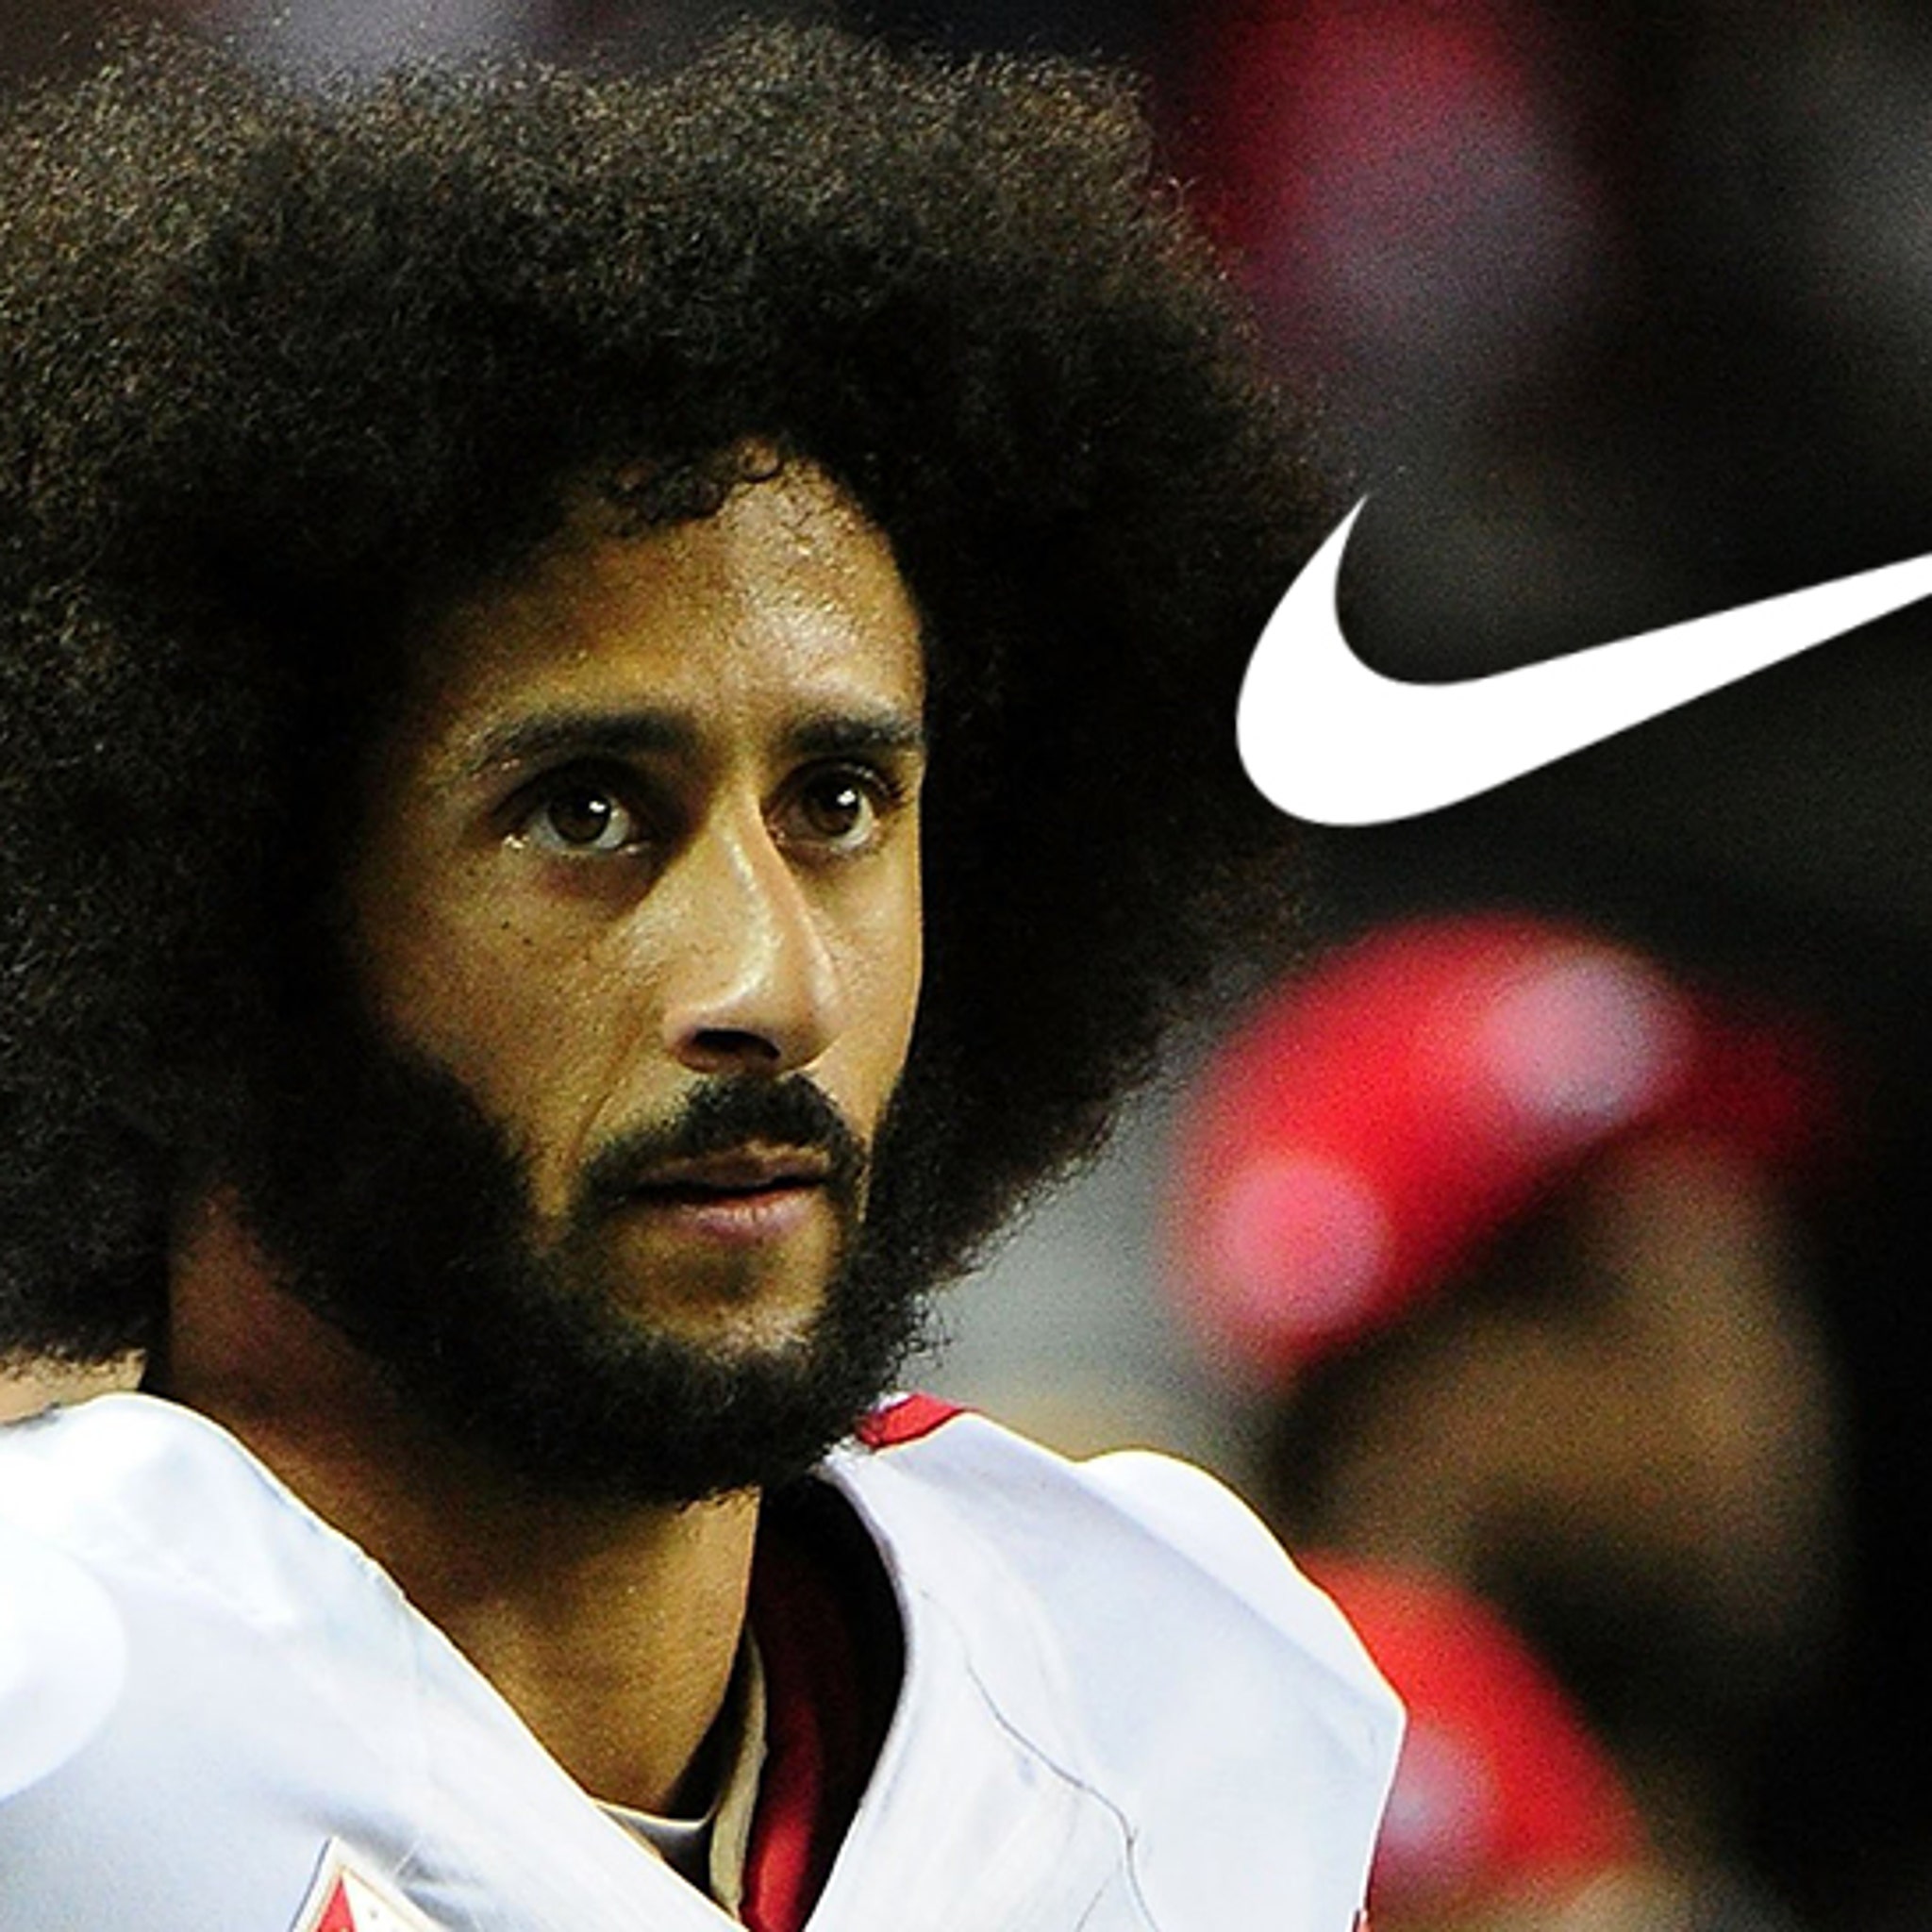 Pickering Solenoide Hacia Nike's Colin Kaepernick Deal Adds Up When You See Customer Data ... And We  Did